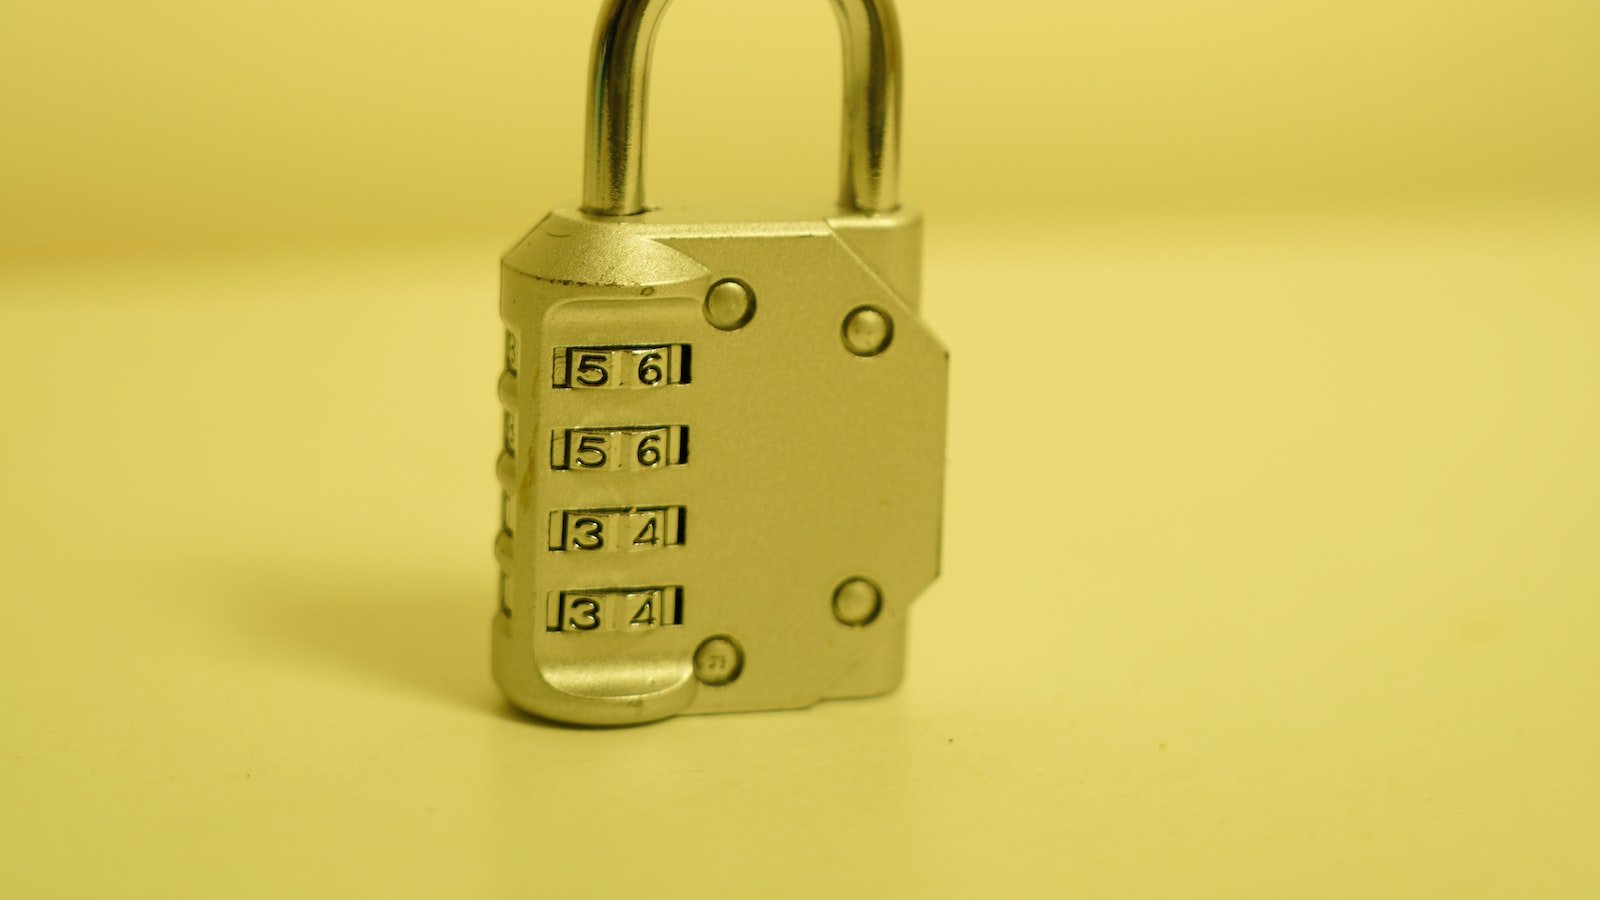 Factors to Consider When Selecting a Padlock